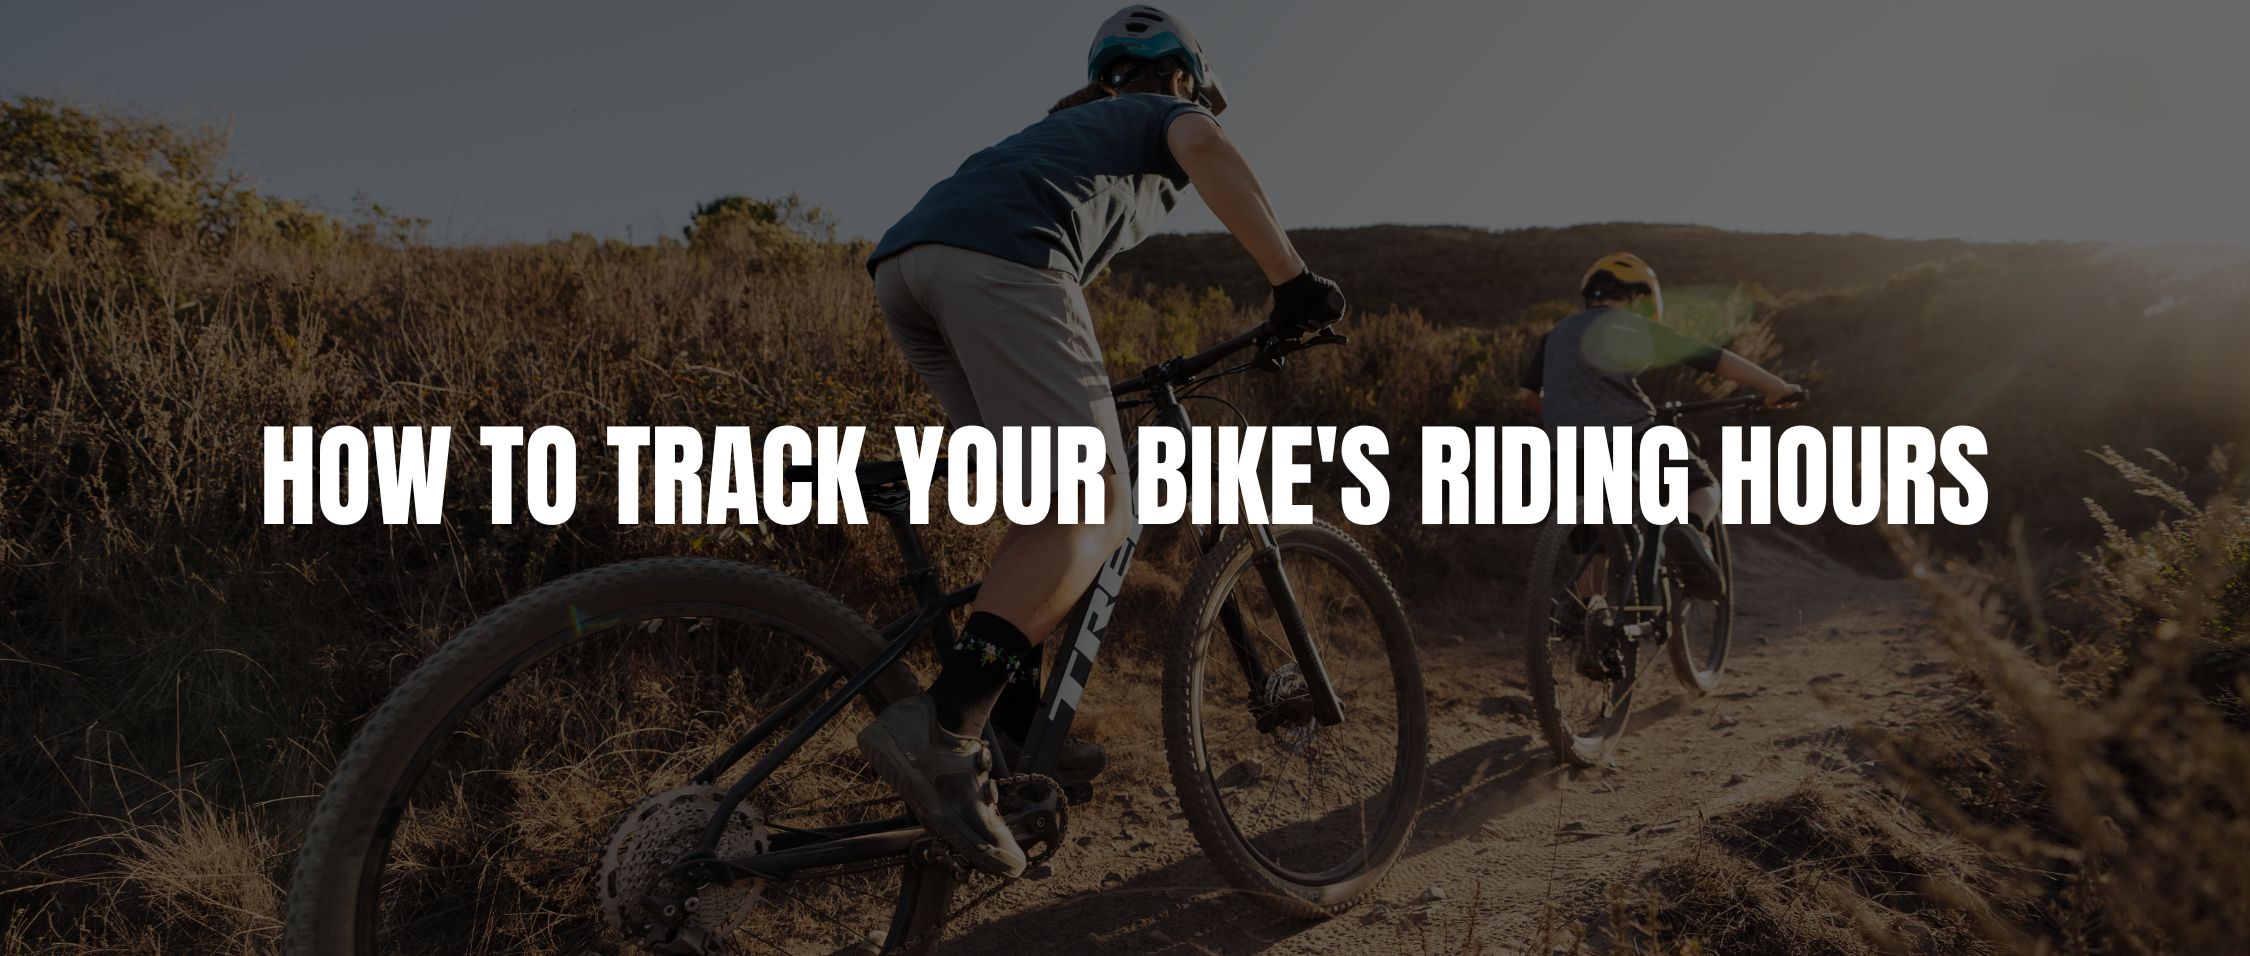 How To Track Your Bike's Riding Hours. Image of people riding their mountain bikes